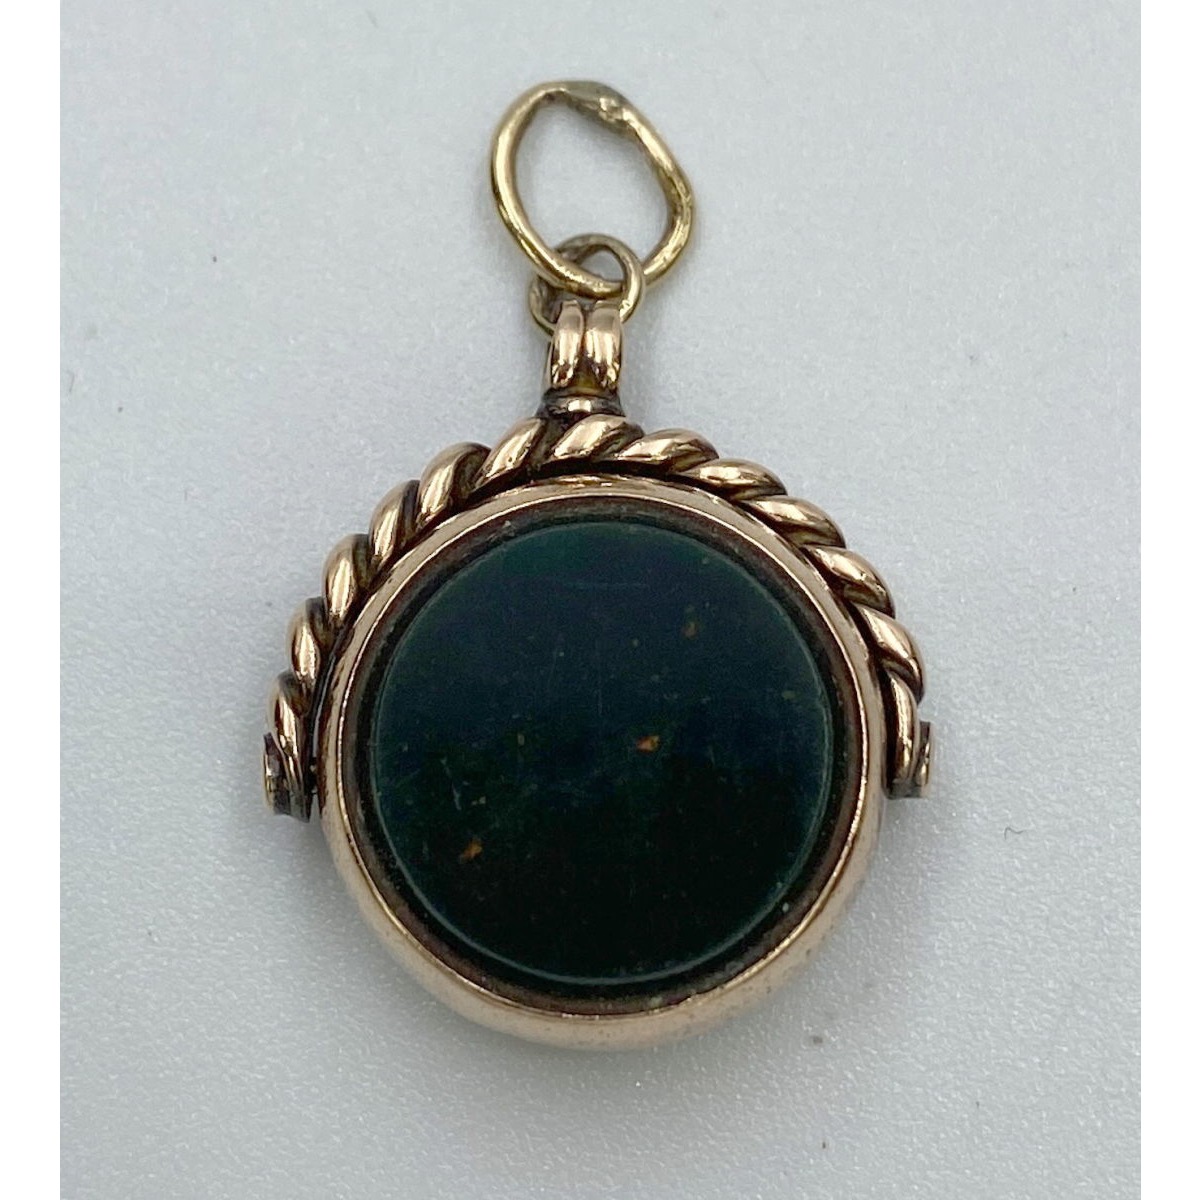 Small Antique English Gold Fob - Perfect for Grouping